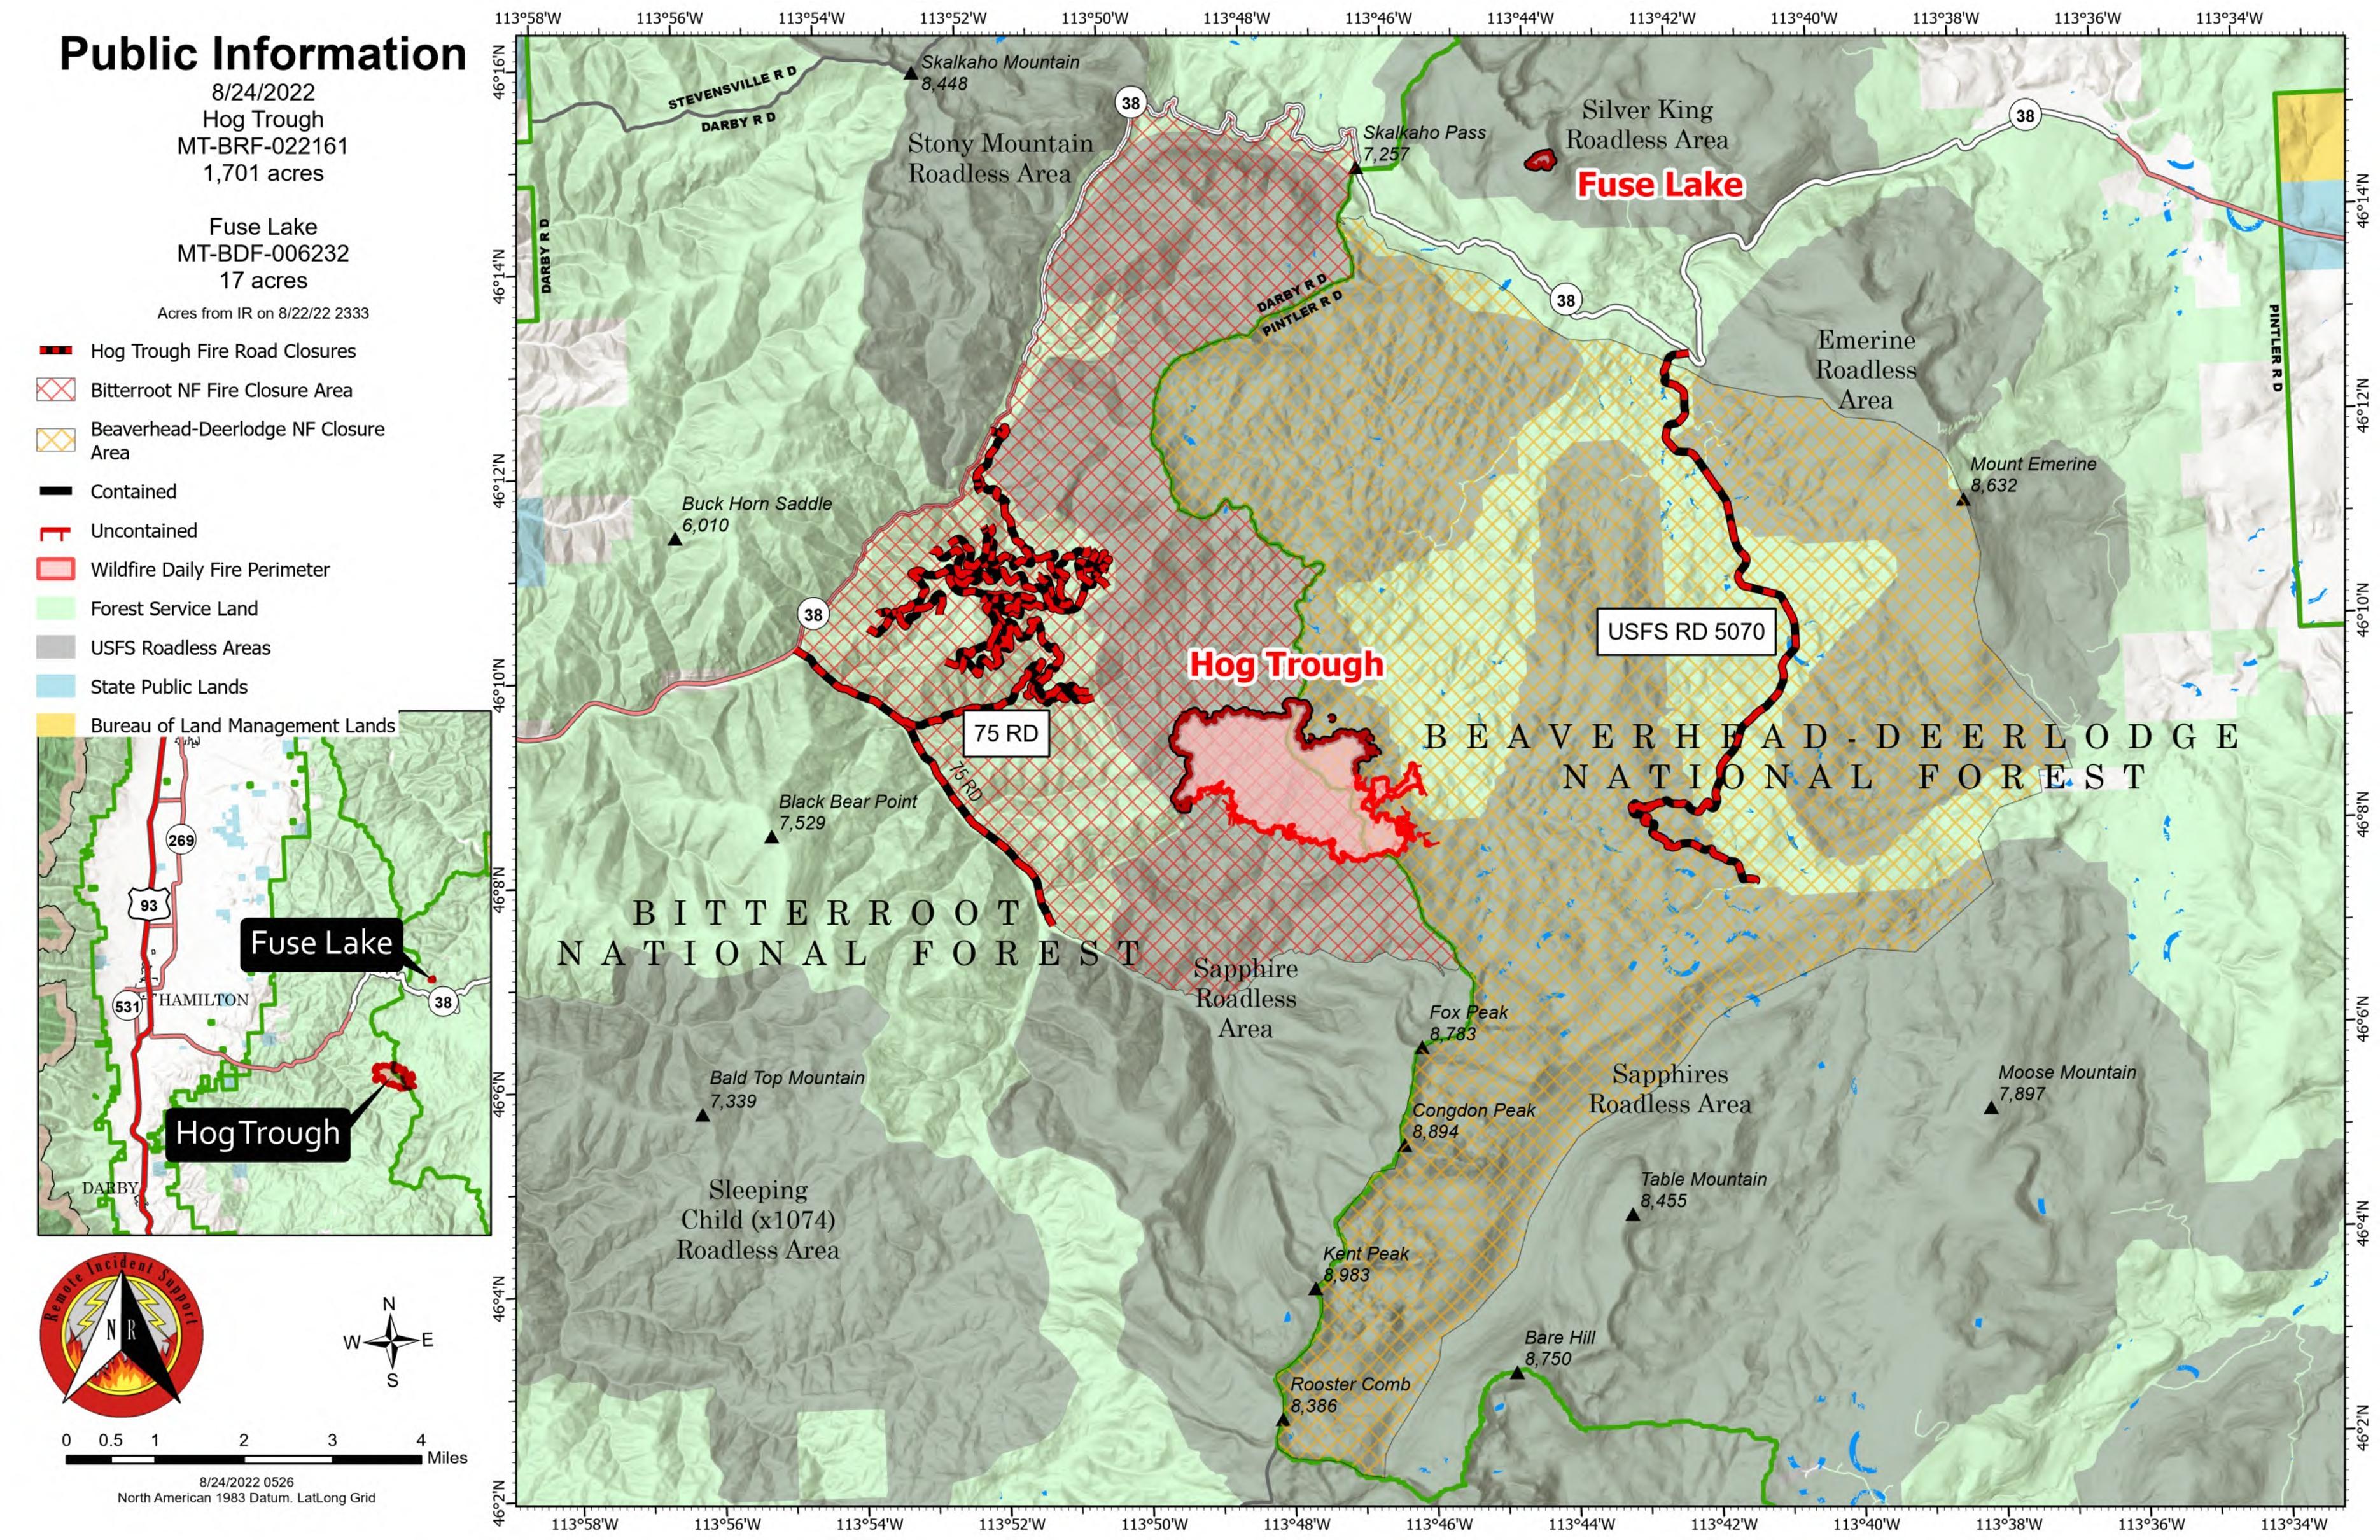 Hog Trough Fire map for August 24, 2022